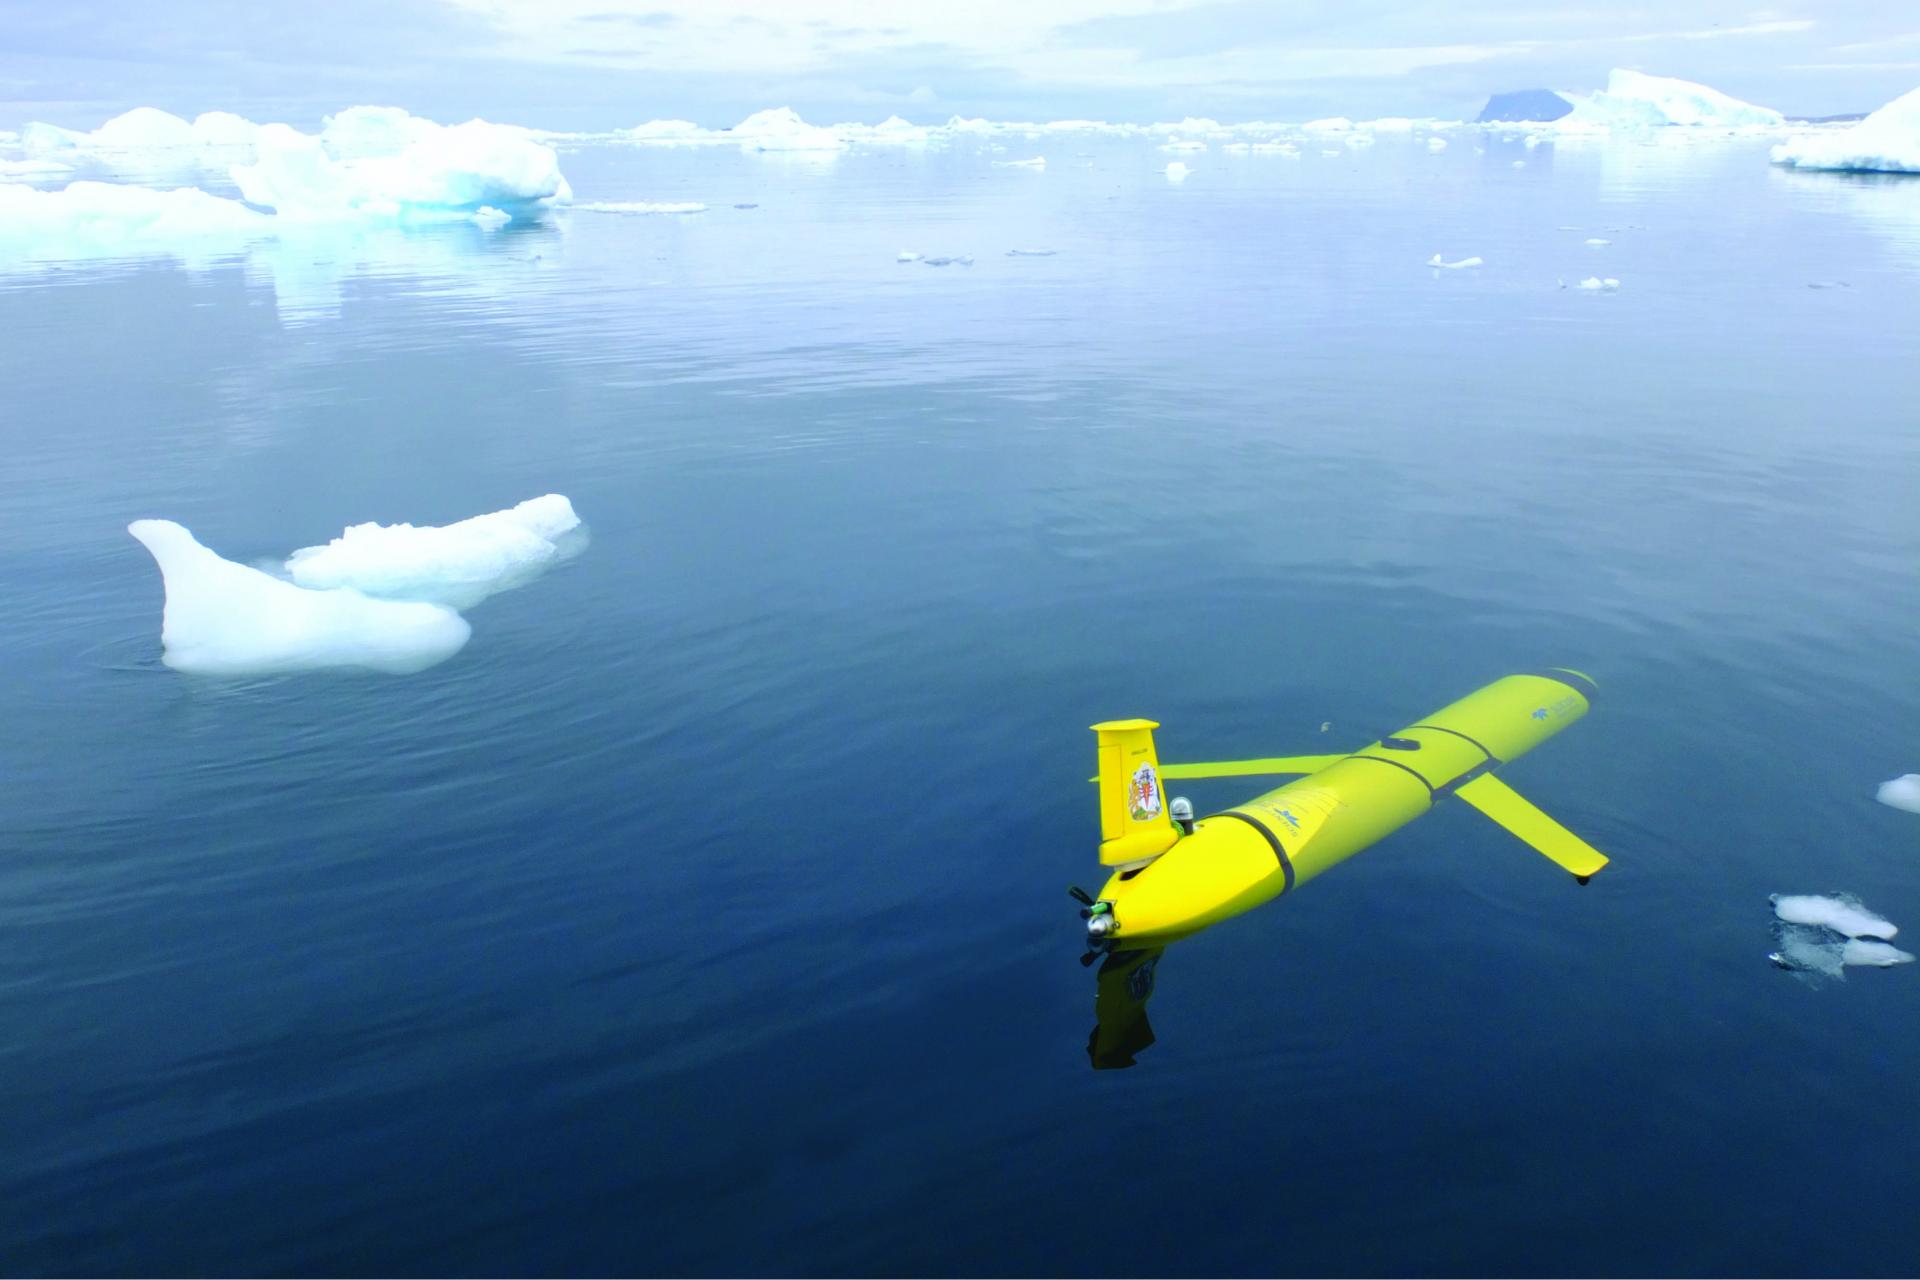 A glider starts a mission in Antarctic waters